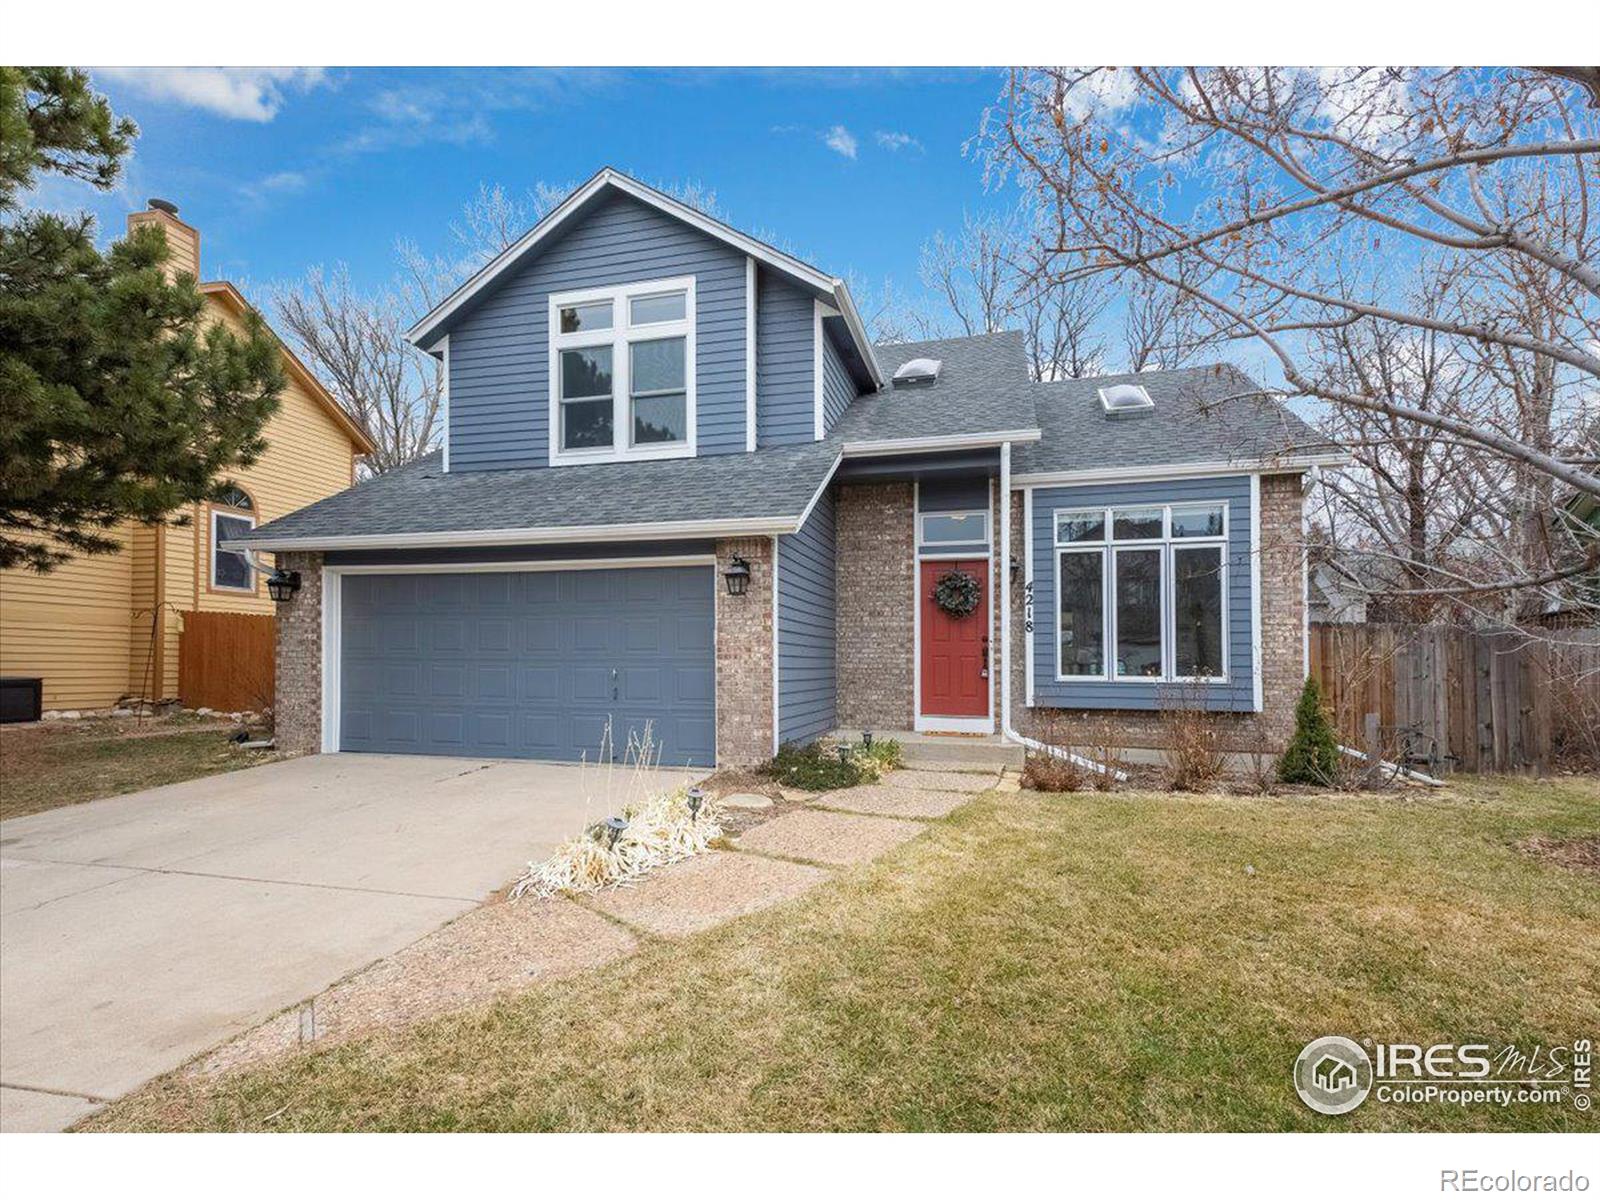 4218  Saddle Notch Drive, fort collins MLS: 4567891004751 Beds: 3 Baths: 3 Price: $585,000